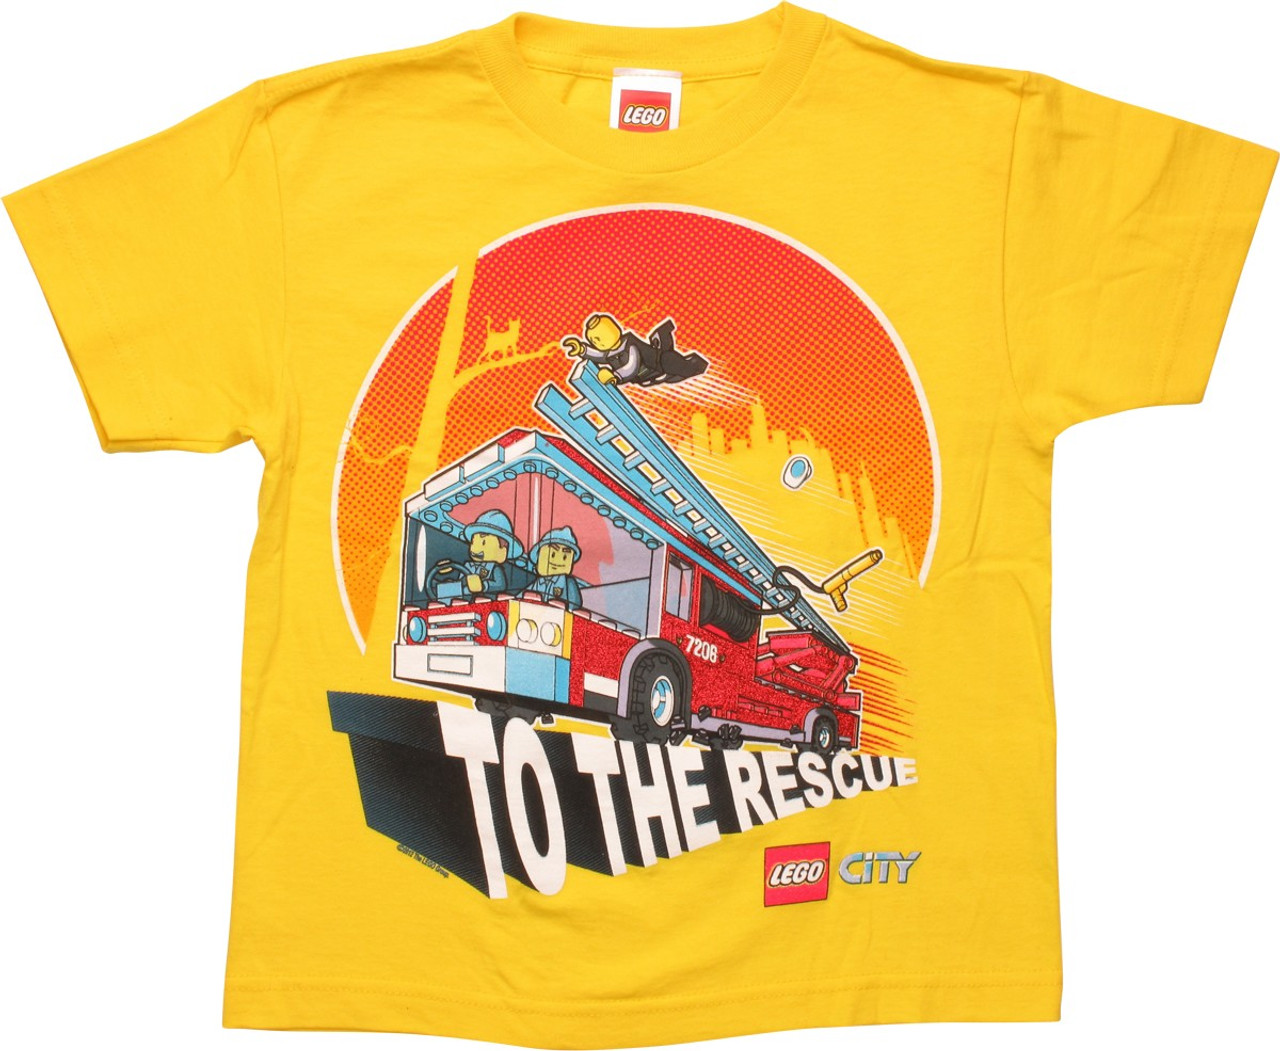 Lego City To the Rescue Fire Truck Juvenile Shirt